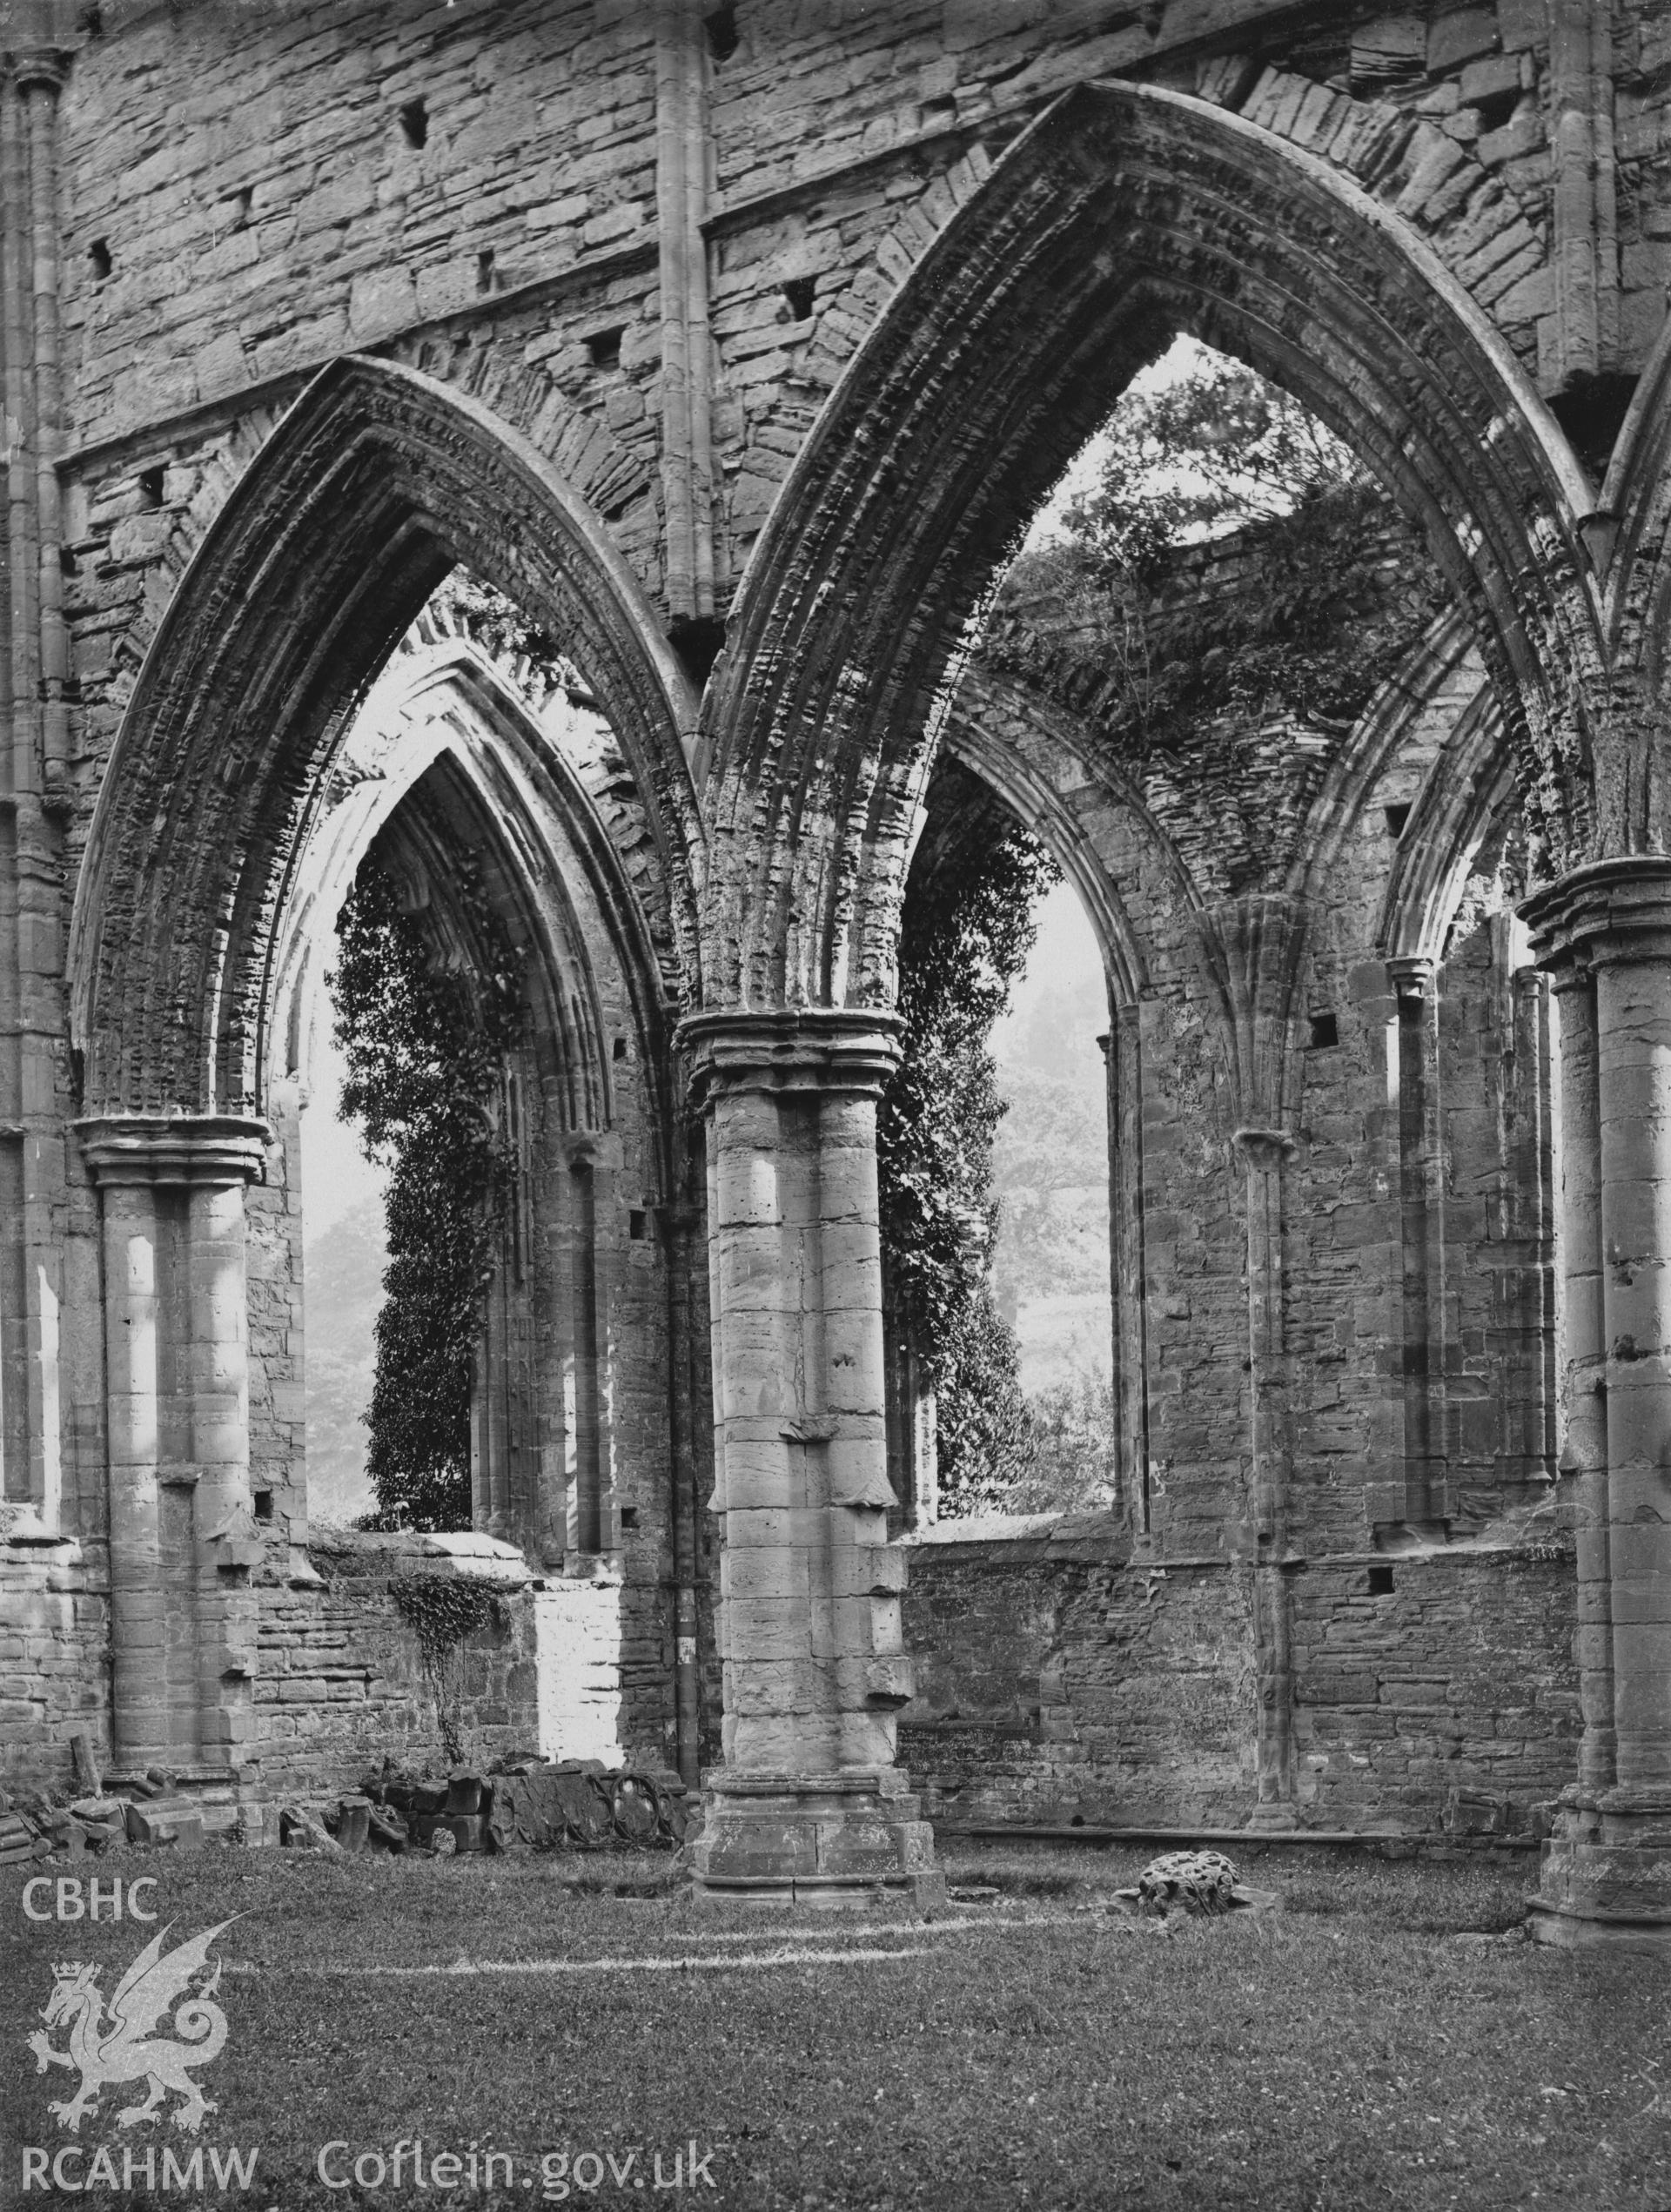 Digital copy of an early National Buildings Record photograph showing an interior view of the Presbytery arcade at Tintern Abbey looking southeast.